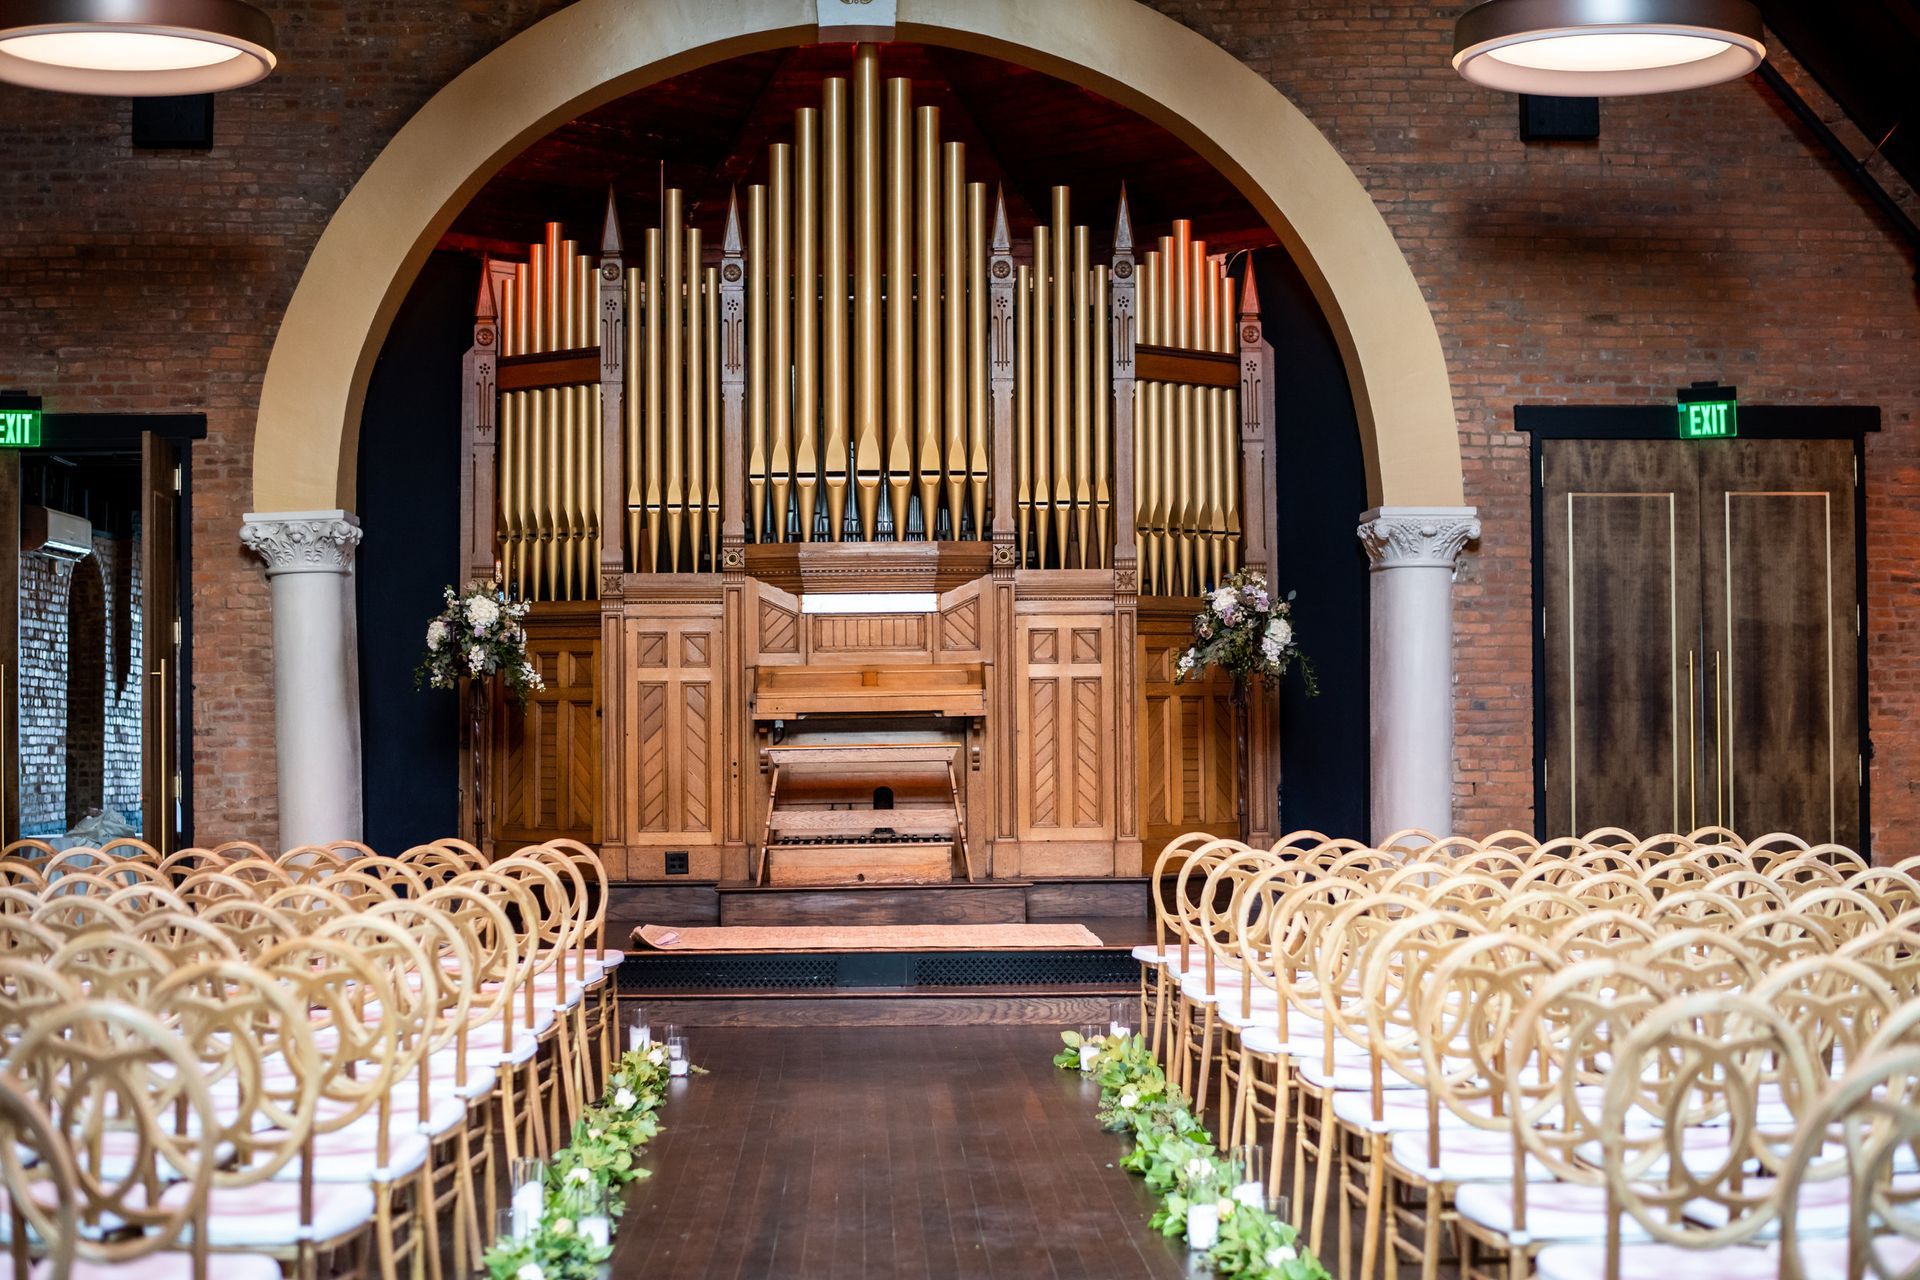 Katie and Dustin’s Wedding church with rows of chairs and an organ in the background by Wedding Planner Nashville